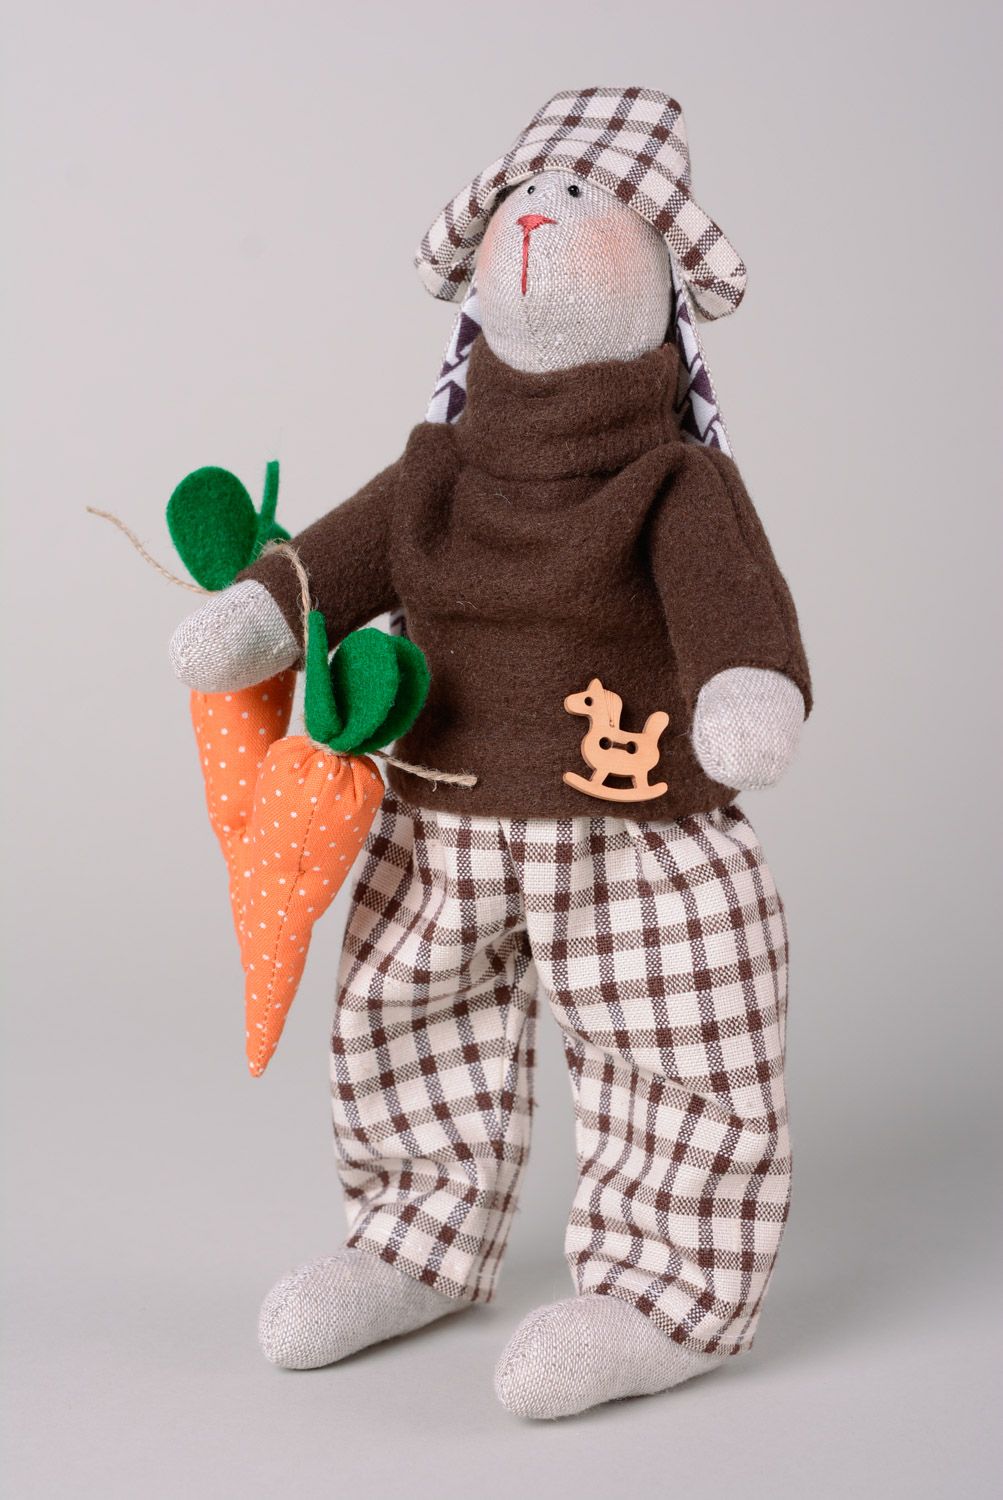 Handmade soft toy sewn of linen and fleece rabbit in checkered suit and hat photo 1